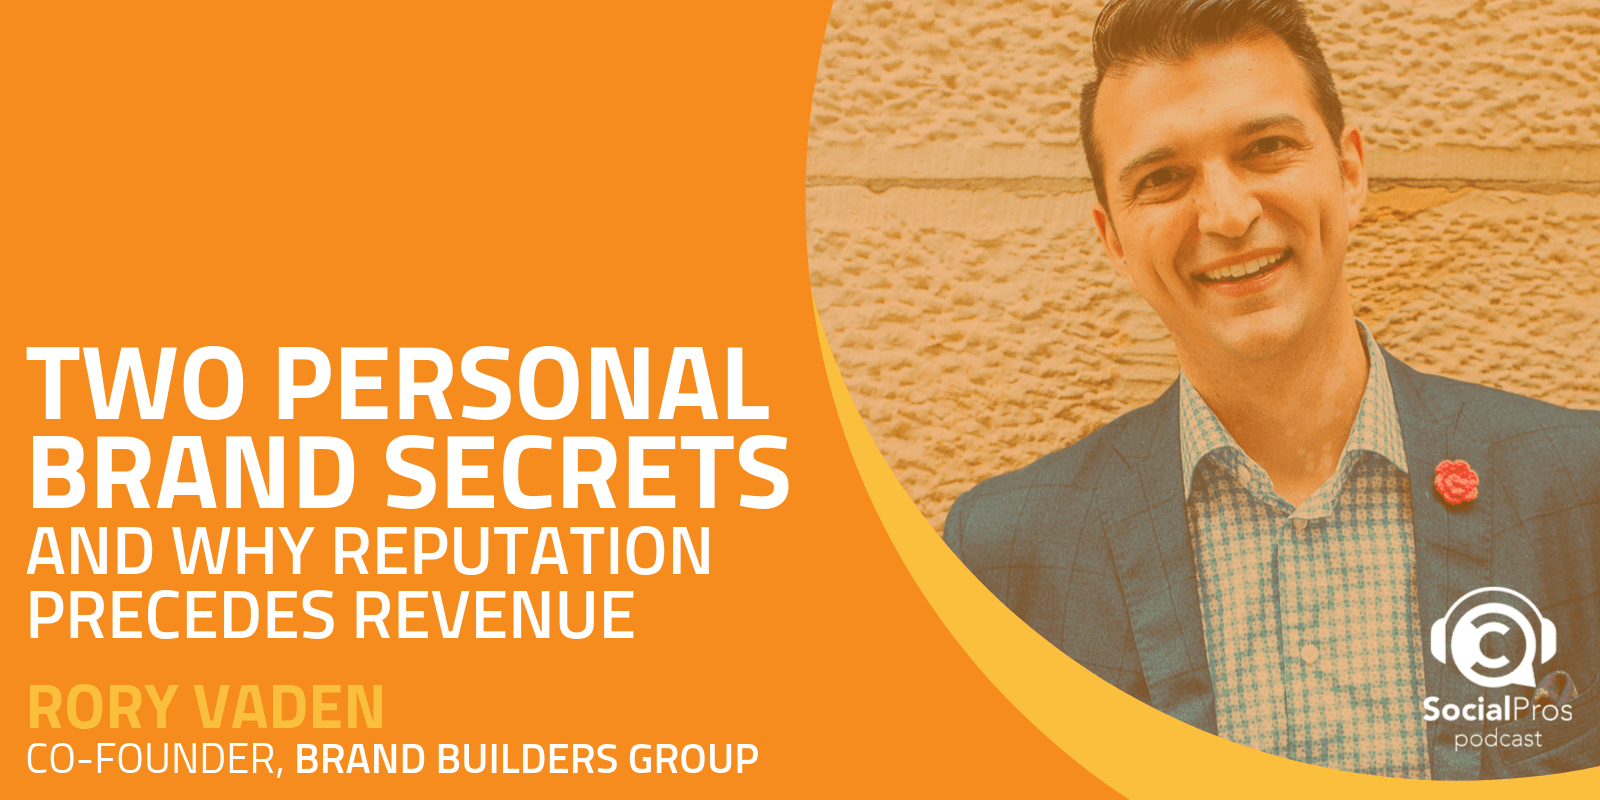 Two Personal Brand Secrets and Why Reputation Precedes Revenue